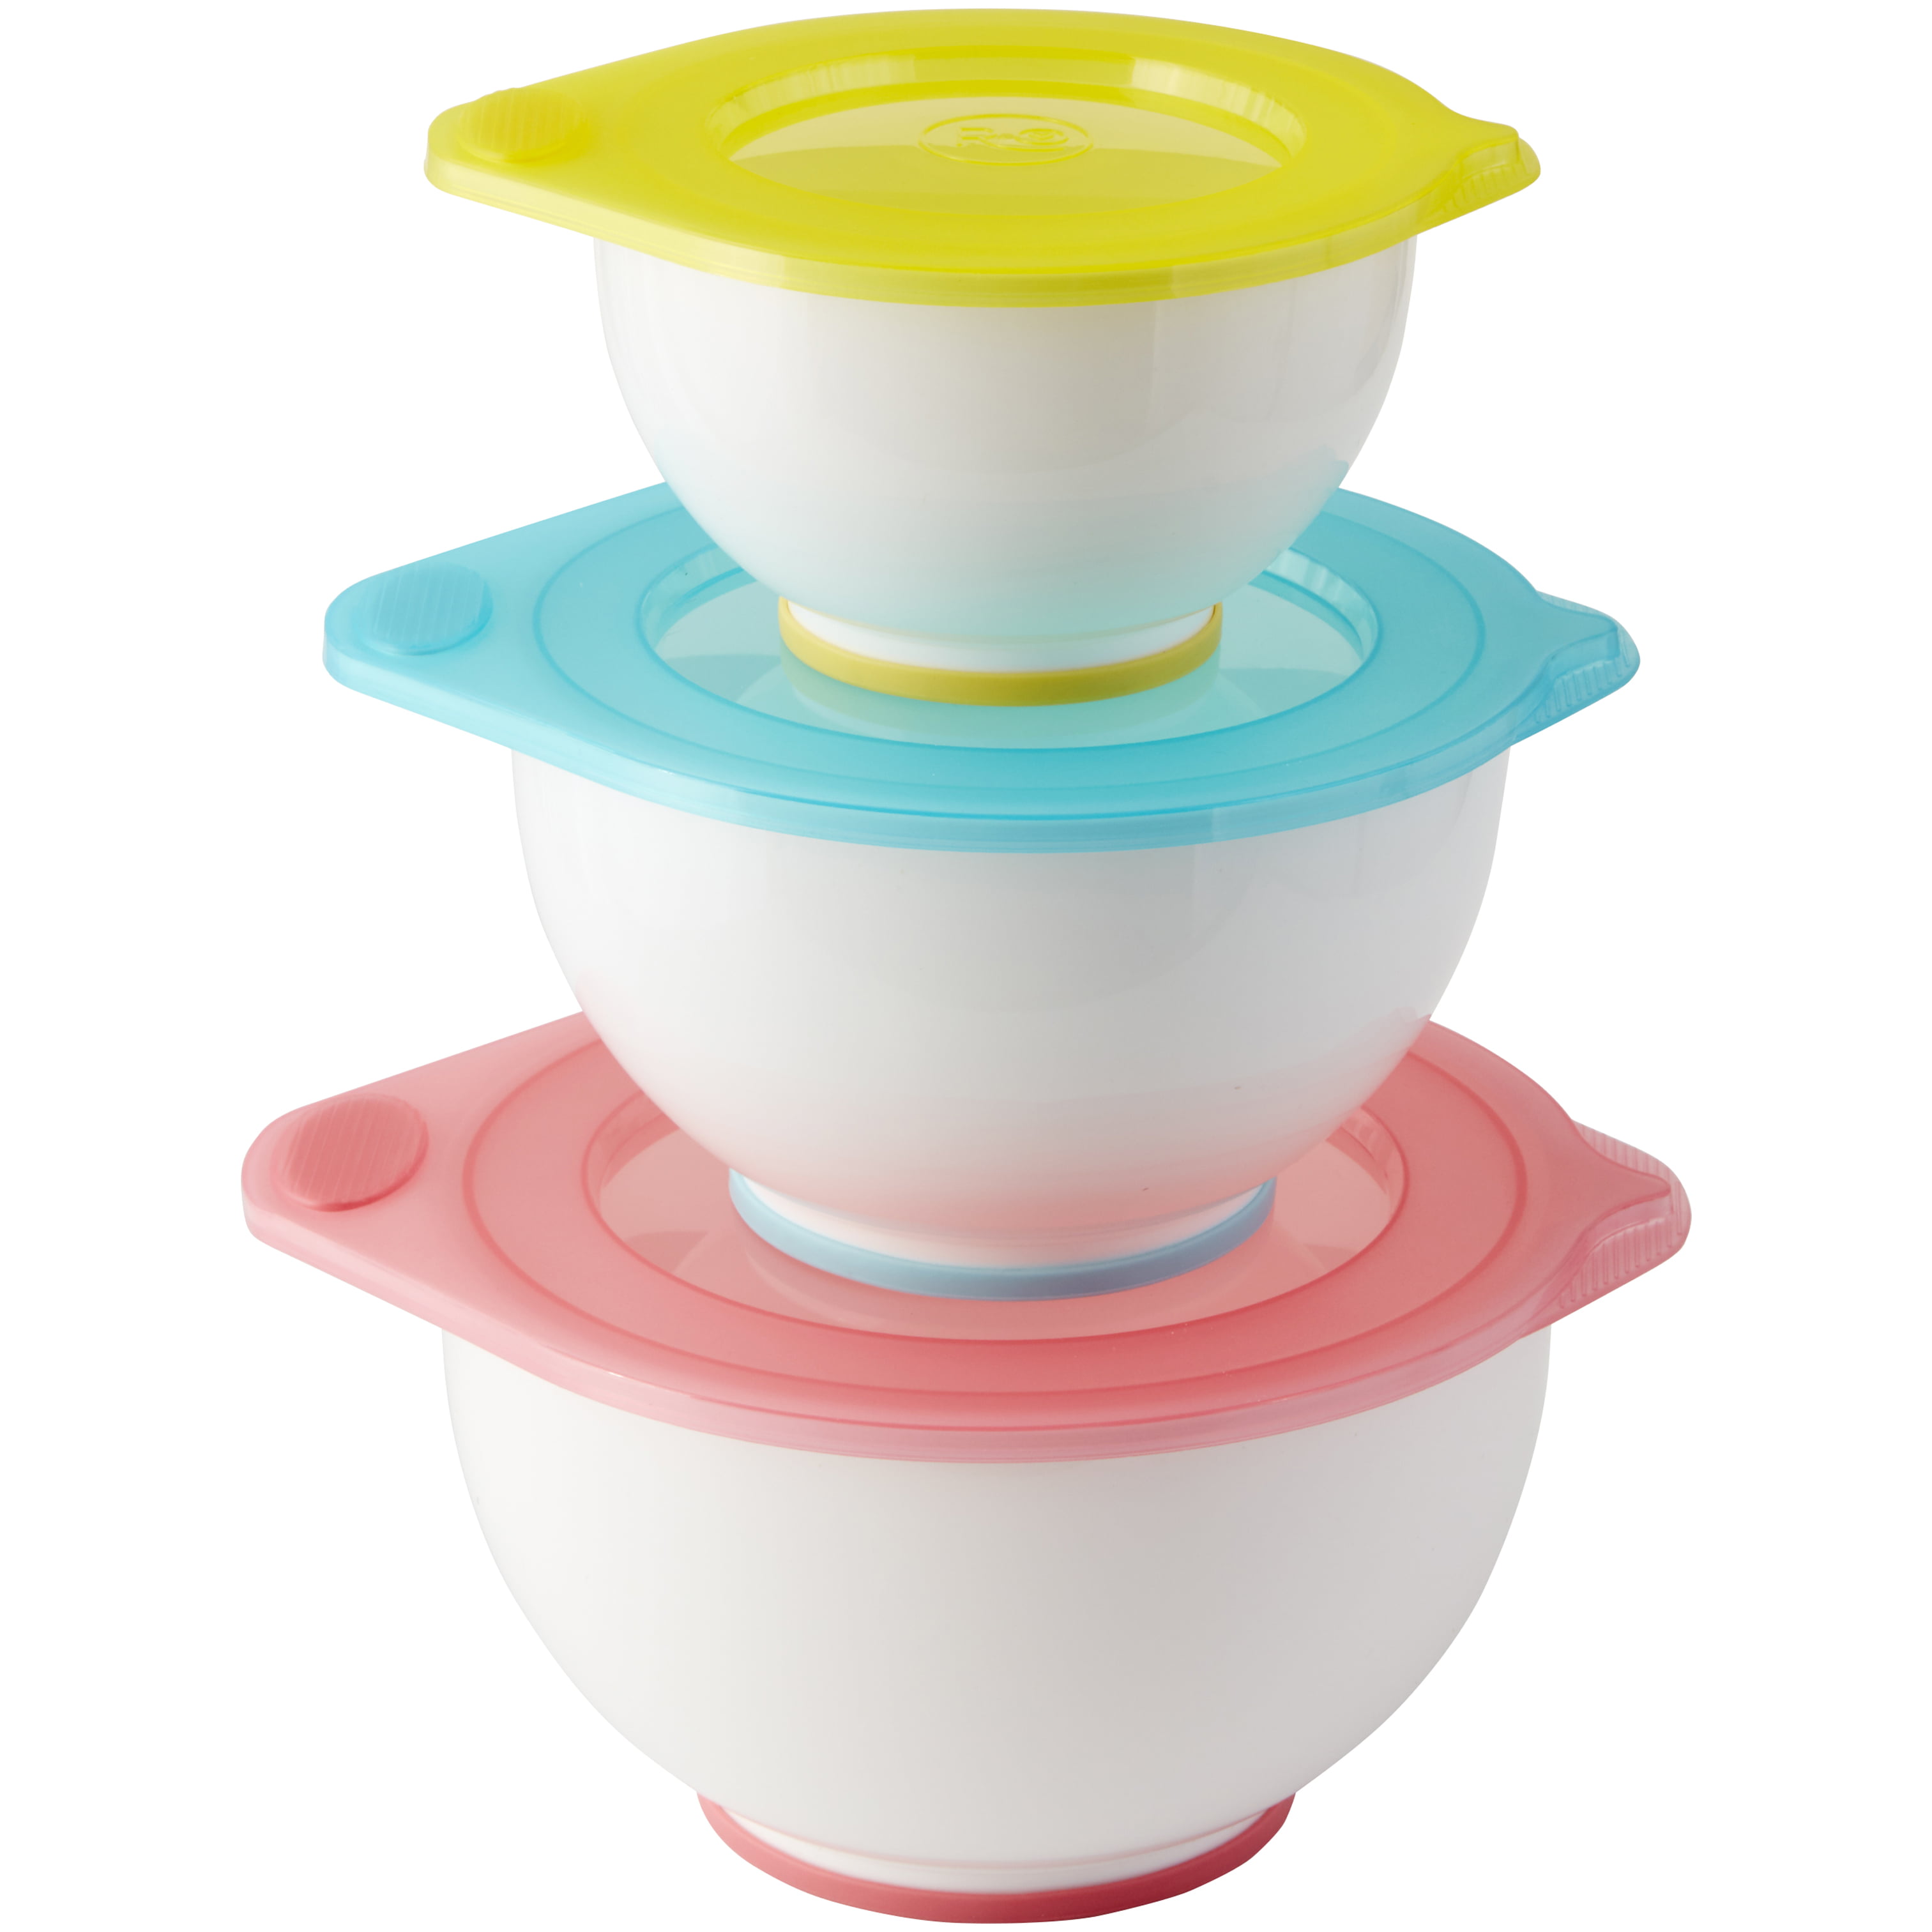 Osnell USA mixing bowls for kitchen - plastic mixing bowls with